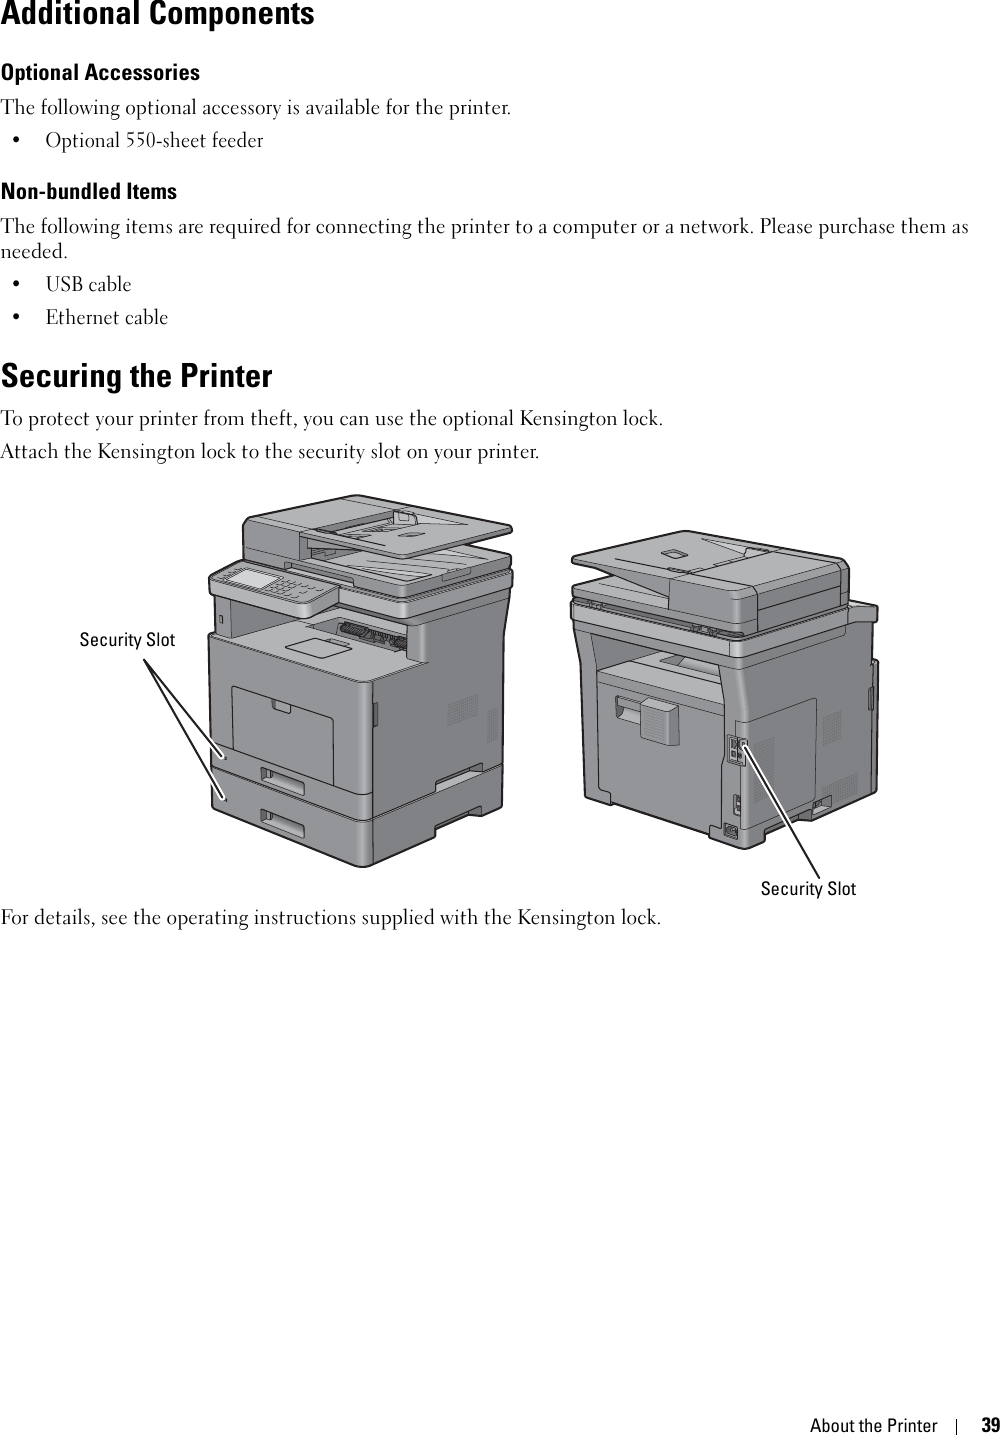 About the Printer39Additional ComponentsOptional AccessoriesThe following optional accessory is available for the printer.• Optional 550-sheet feederNon-bundled ItemsThe following items are required for connecting the printer to a computer or a network. Please purchase them as needed.•USB cable• Ethernet cableSecuring the PrinterTo protect your printer from theft, you can use the optional Kensington lock.Attach the Kensington lock to the security slot on your printer.For details, see the operating instructions supplied with the Kensington lock.Security SlotSecurity Slot